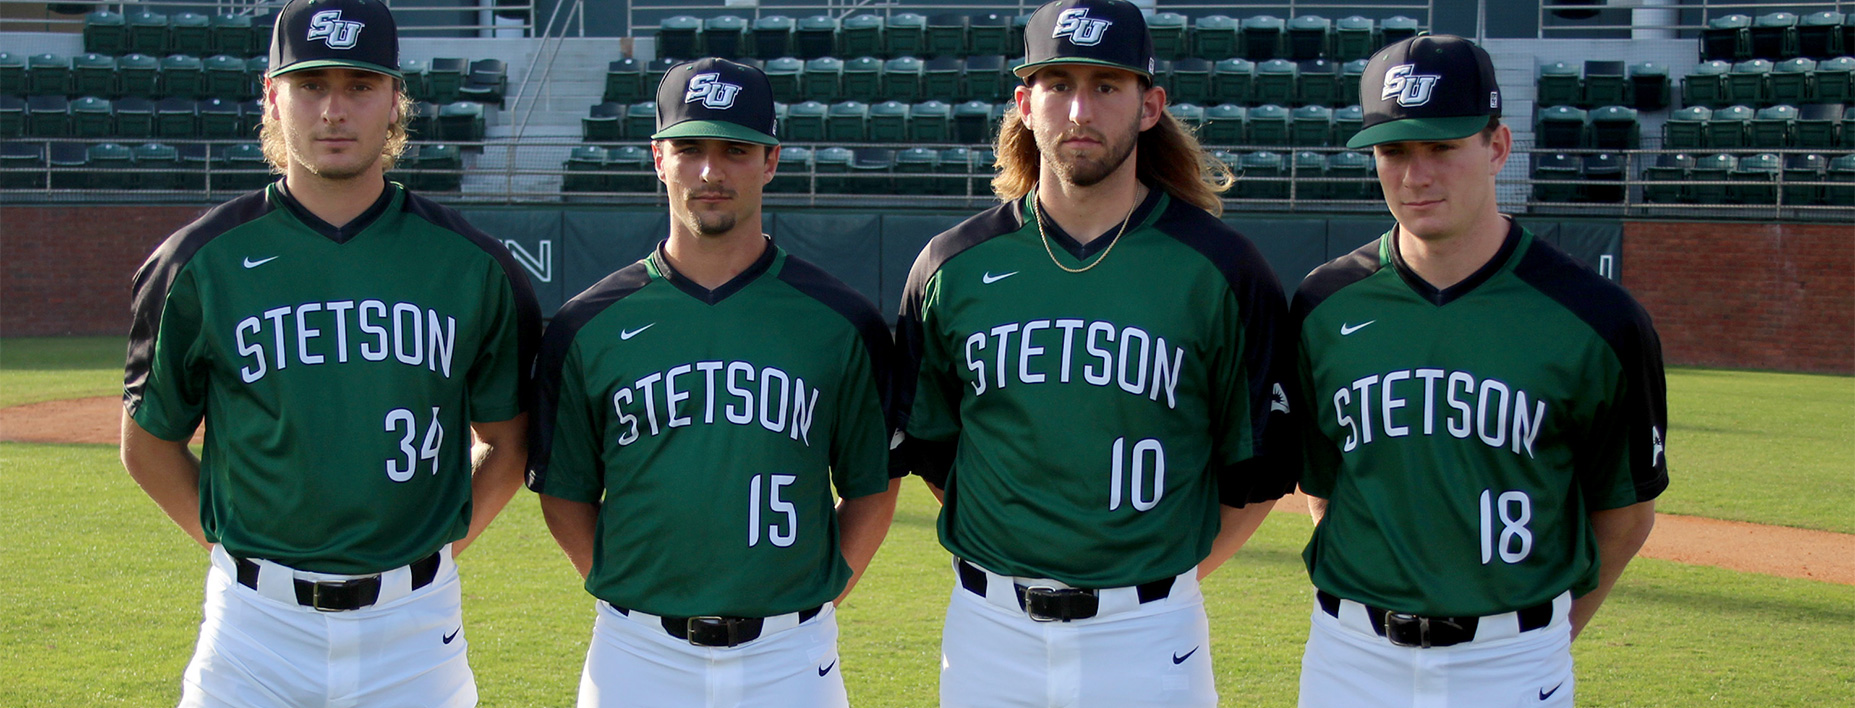 Final Series To Feature Celebration of Seniors - Stetson Today